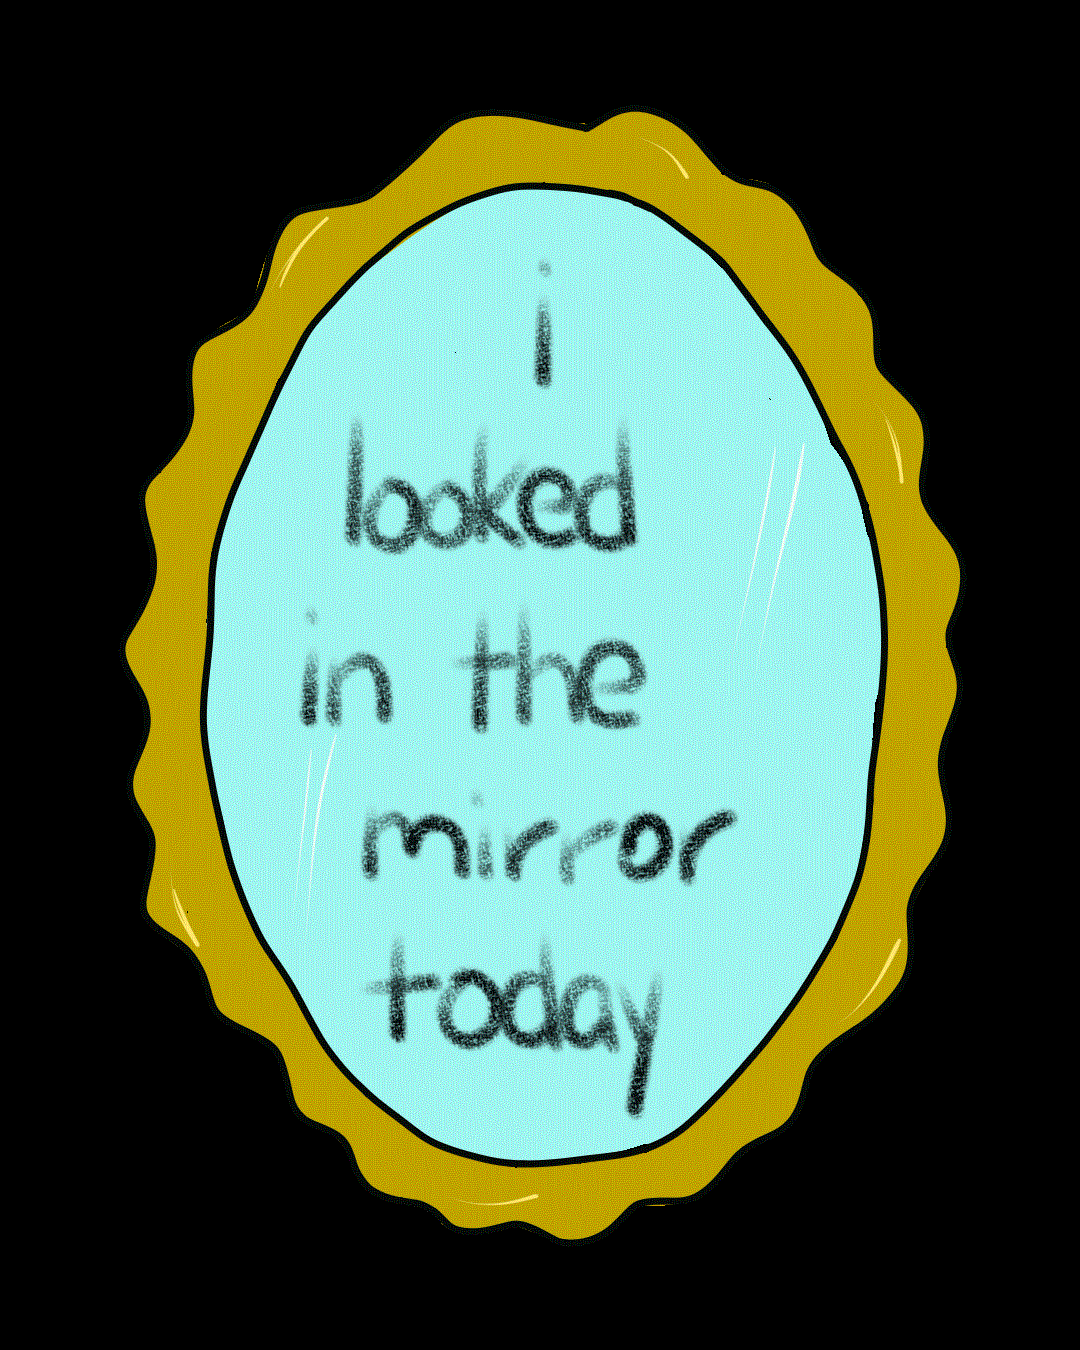 Mirror reading, "i looked in the mirror today"